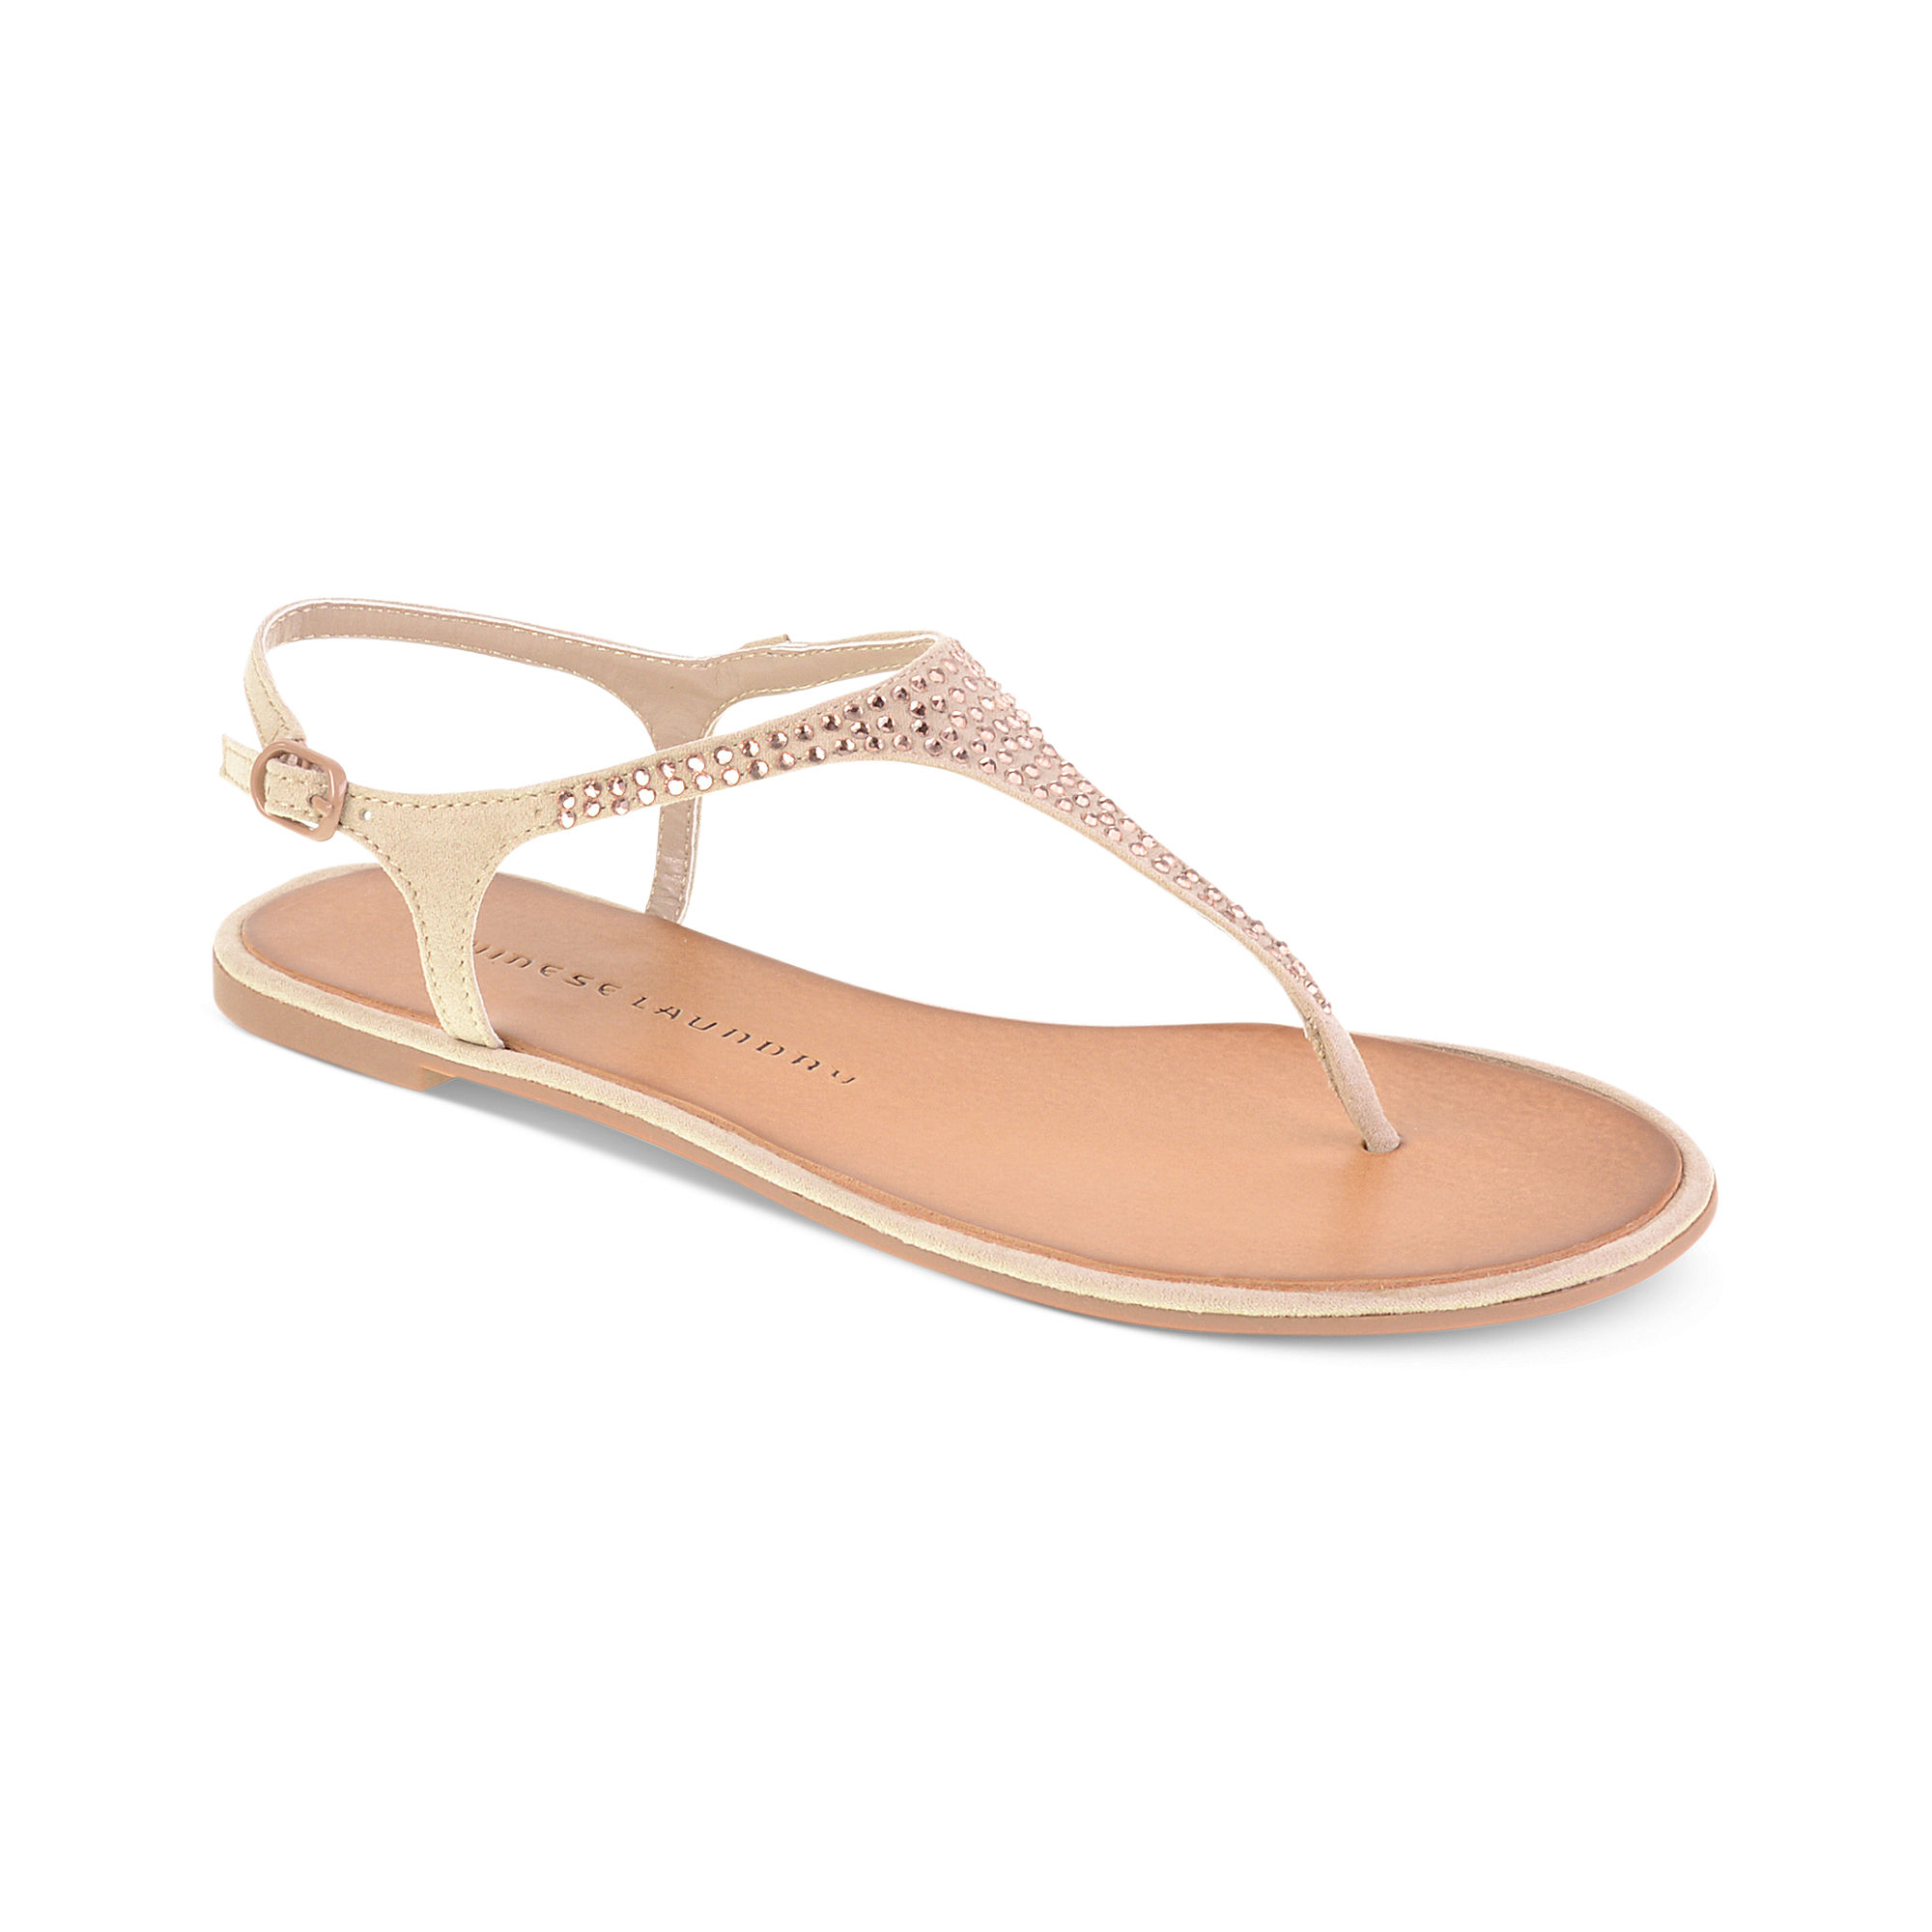 Chinese laundry Game Show Flat Thong Sandals in Natural | Lyst